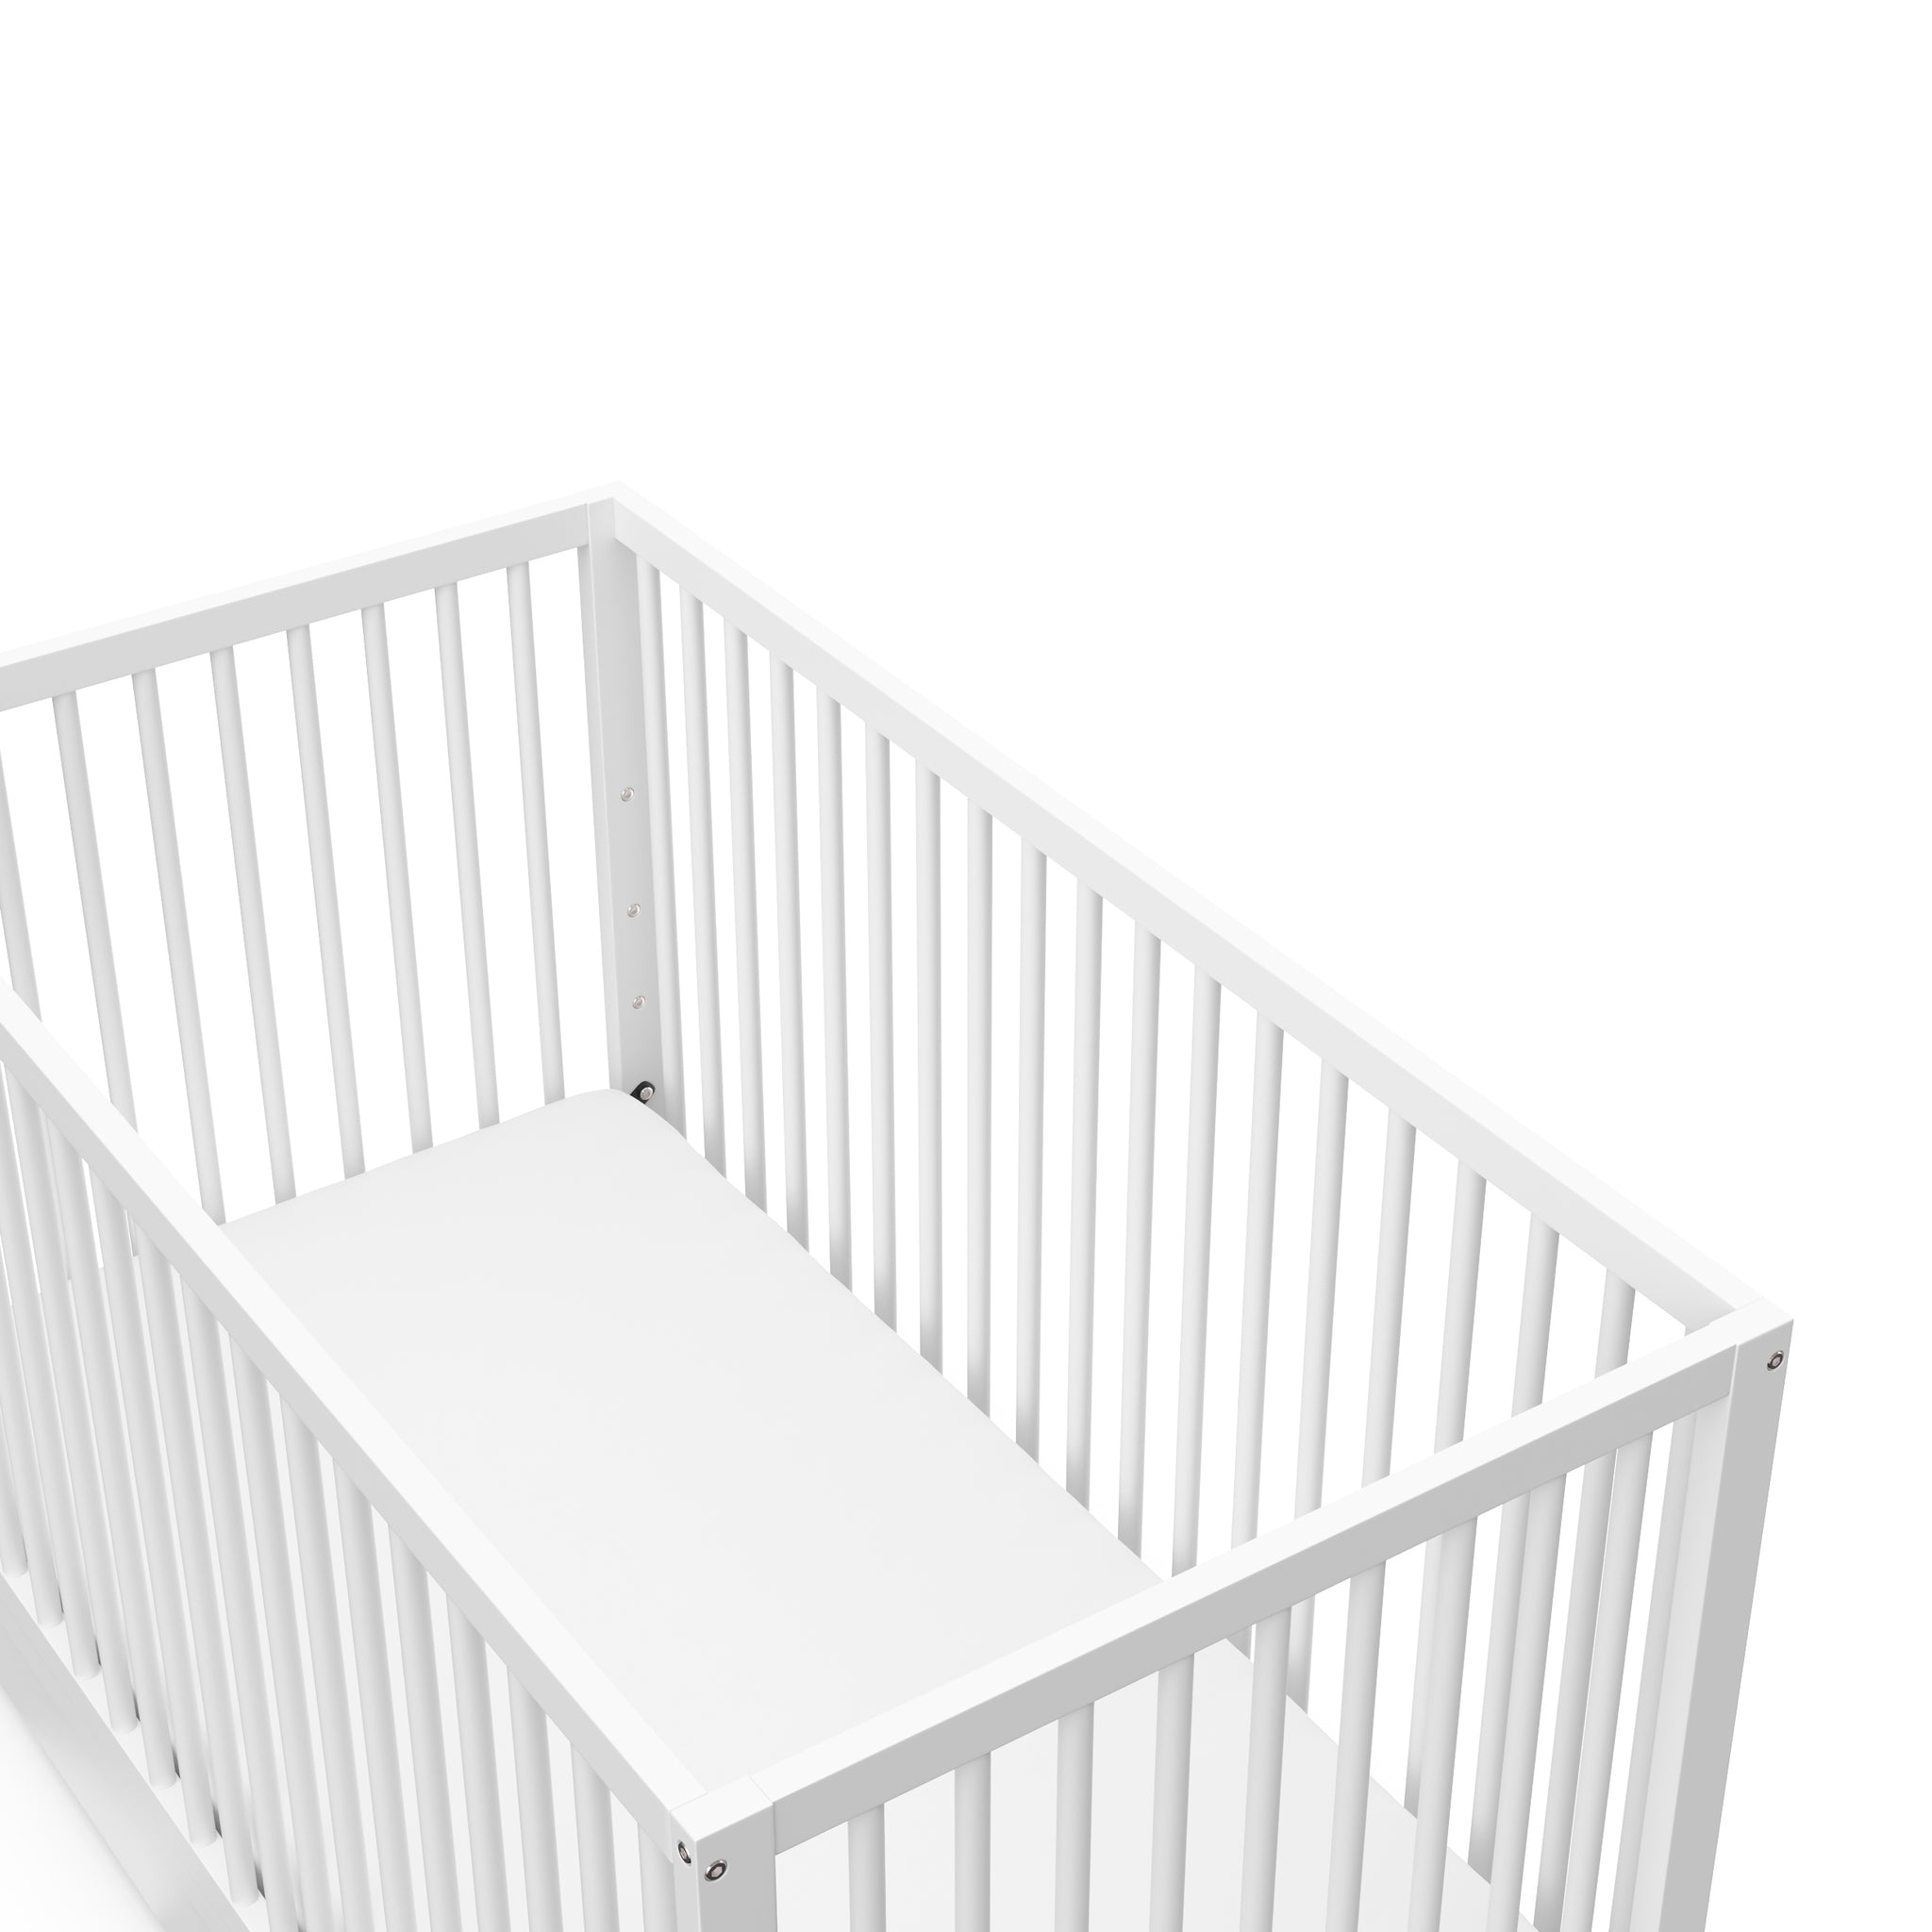 Close-up view of white crib with drawer